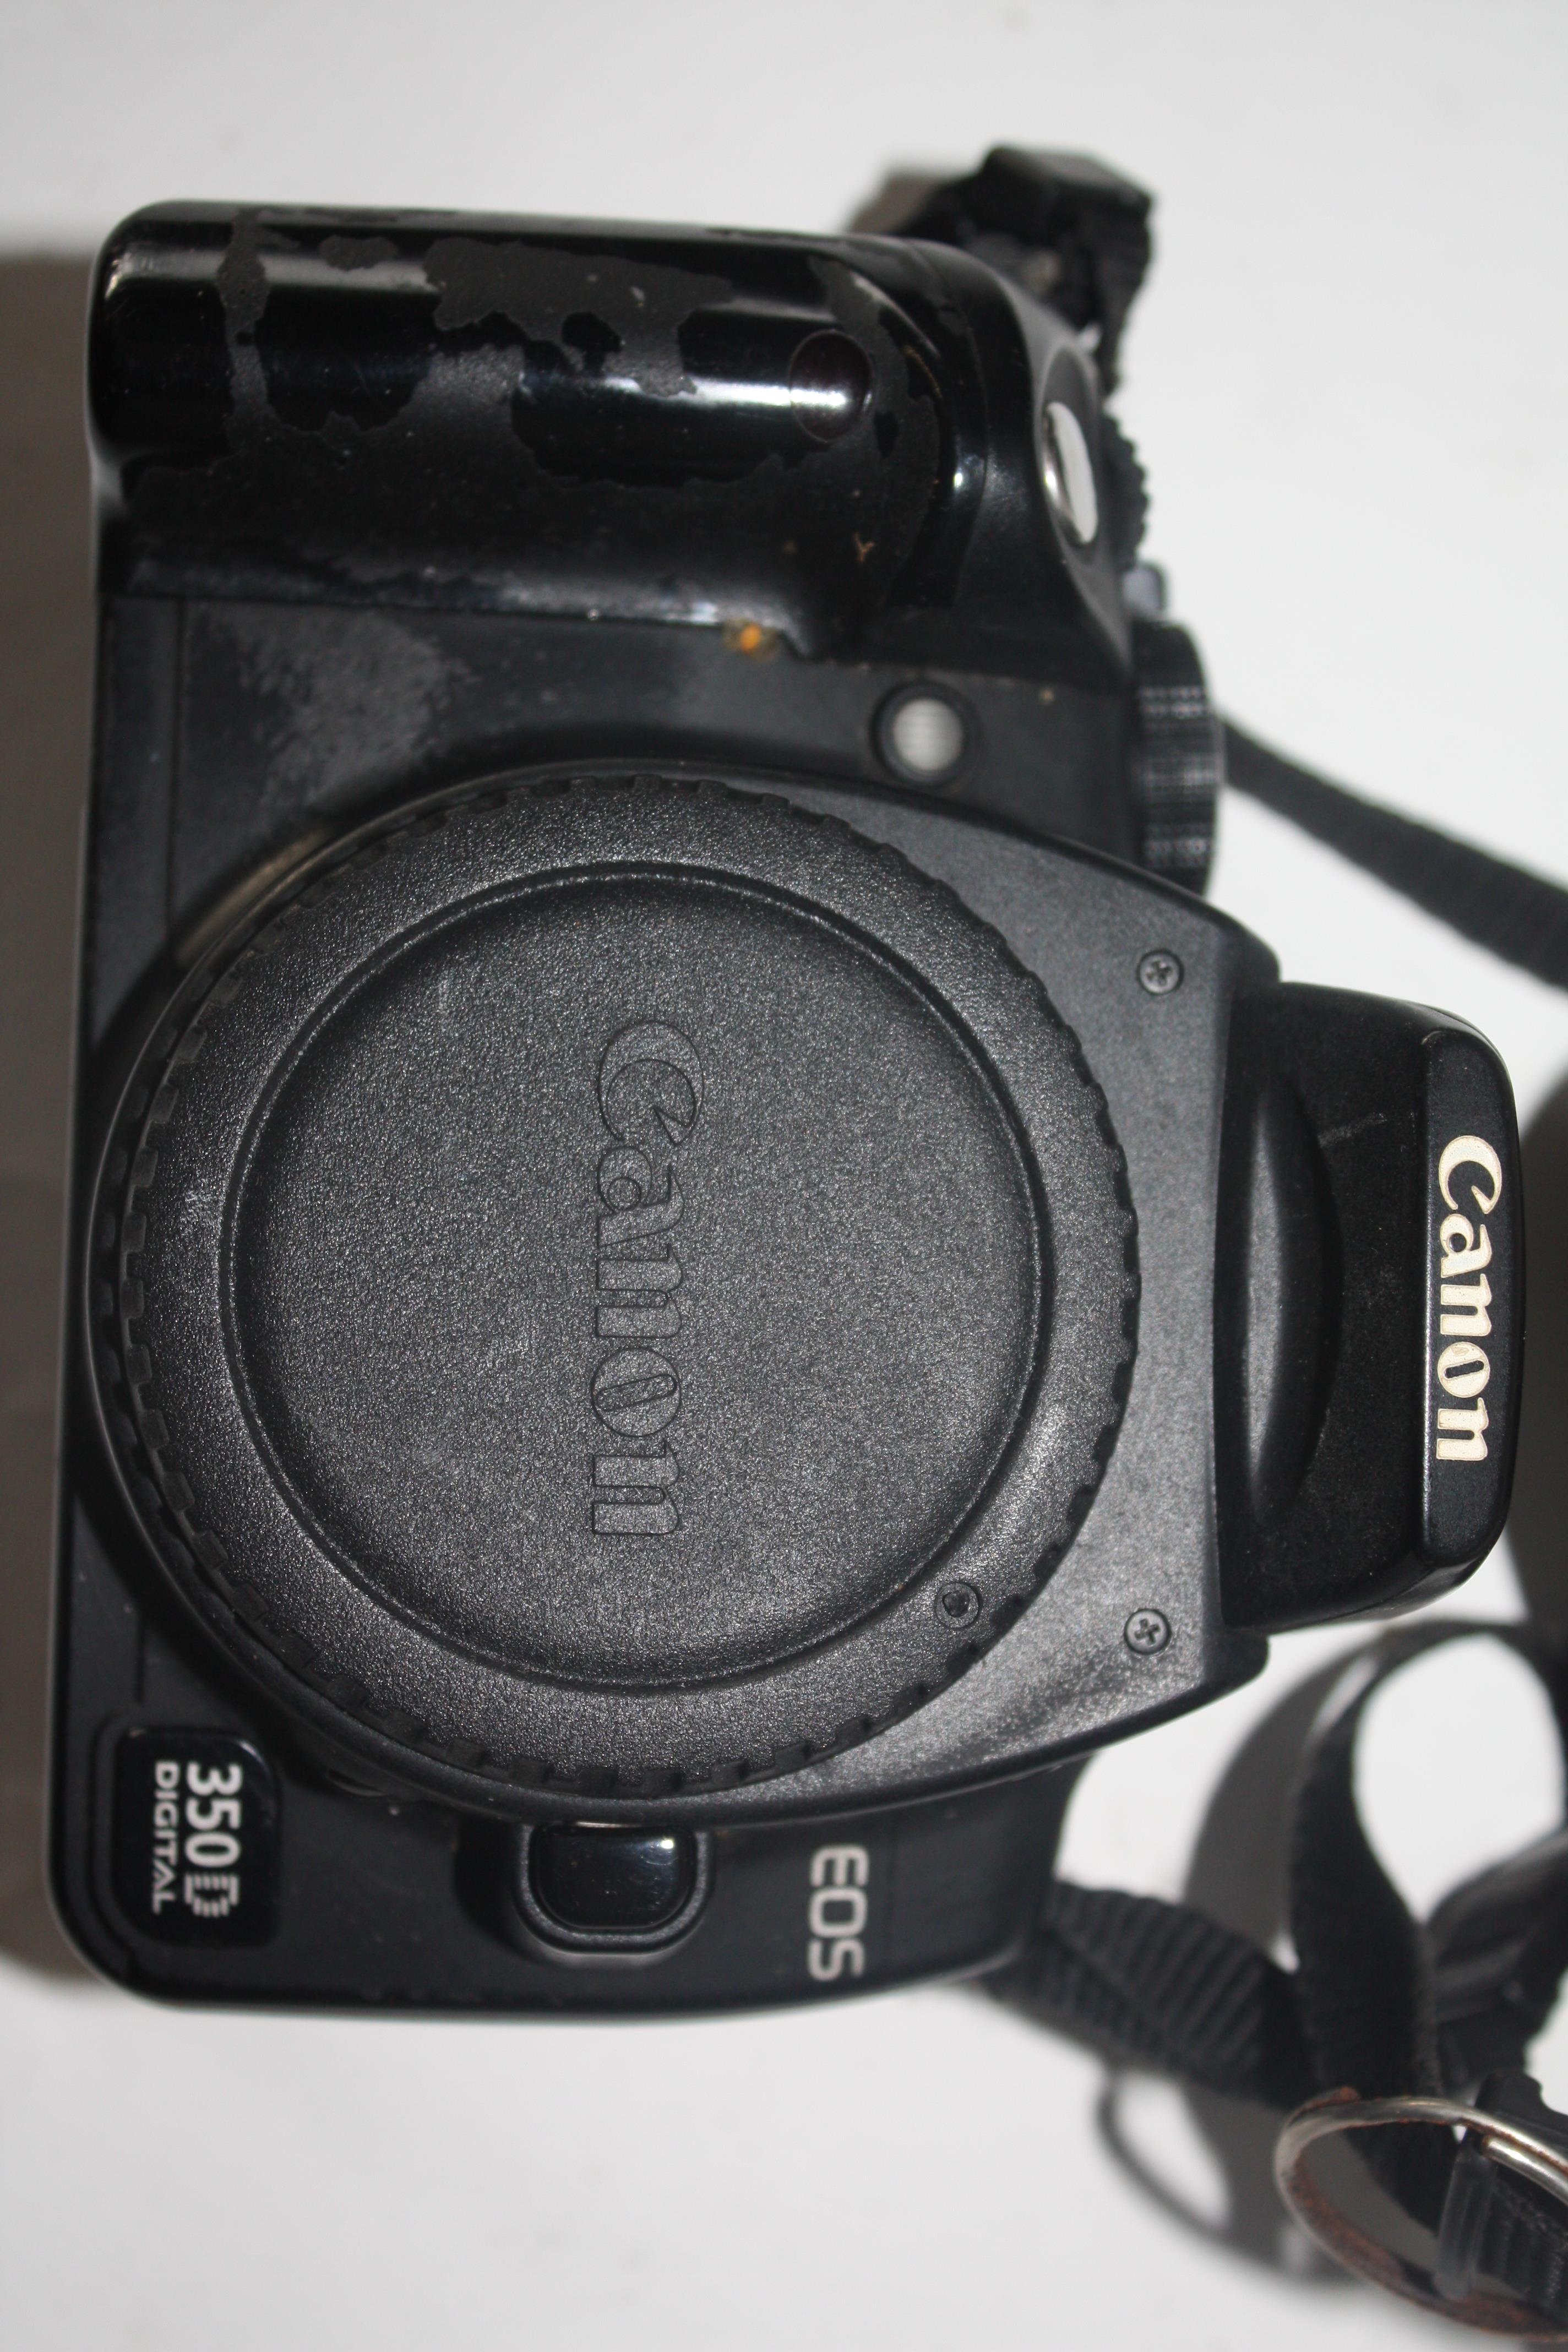 Canon 350 D body together with a Fujifilm S5200 and a Minolta Dimage - Bild 4 aus 7